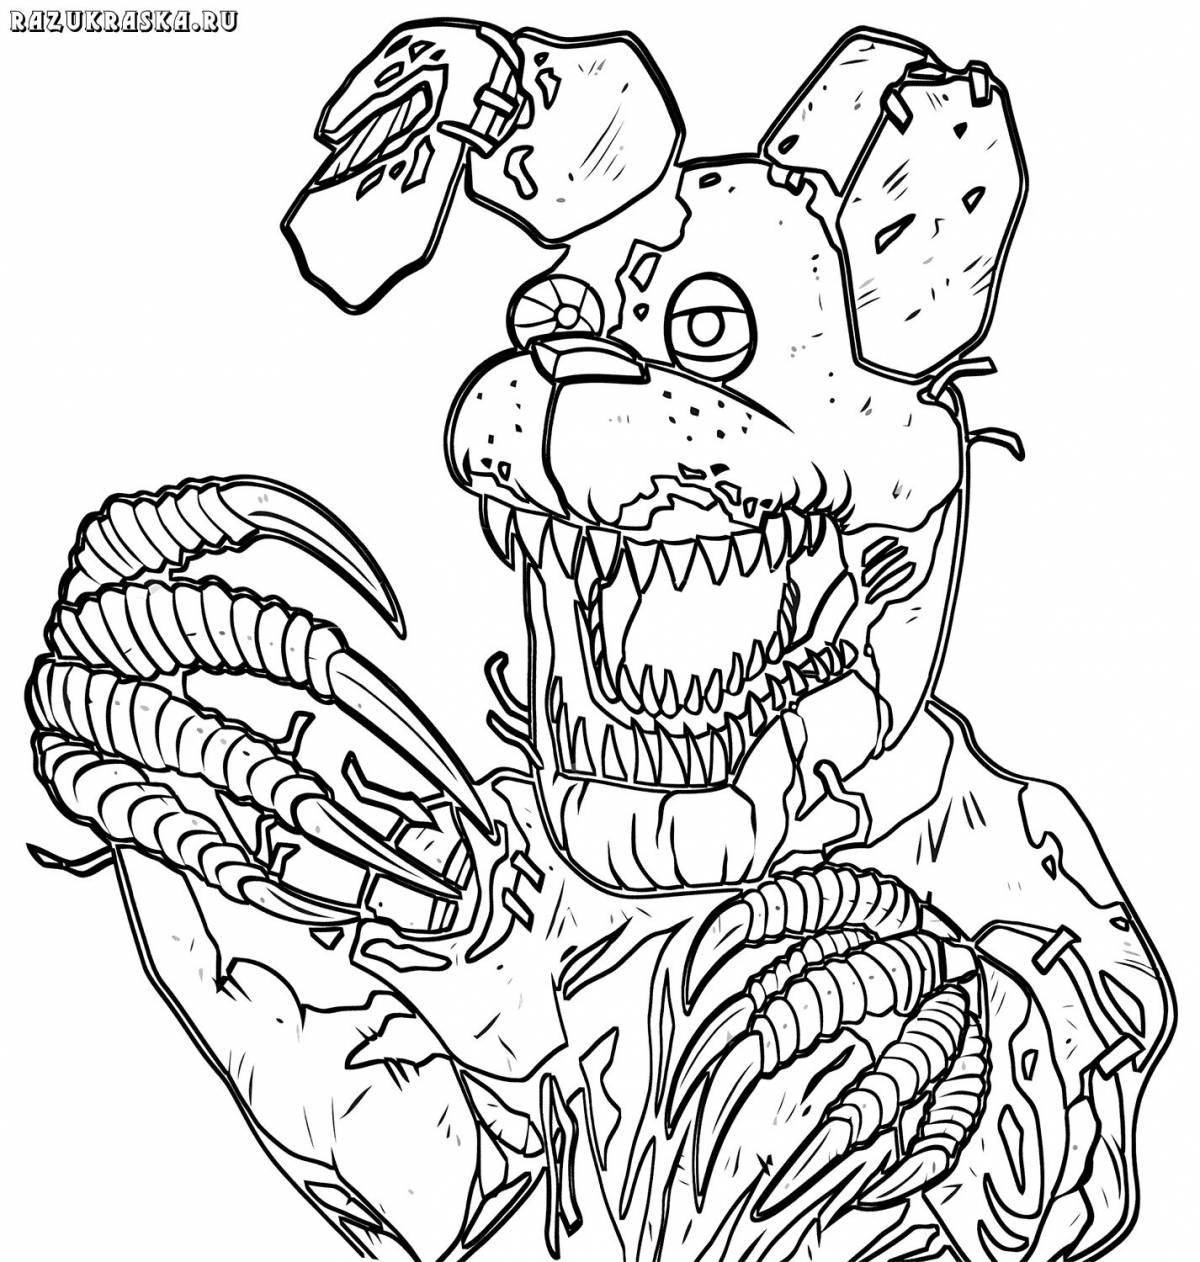 Molten Freddy's exciting coloring book